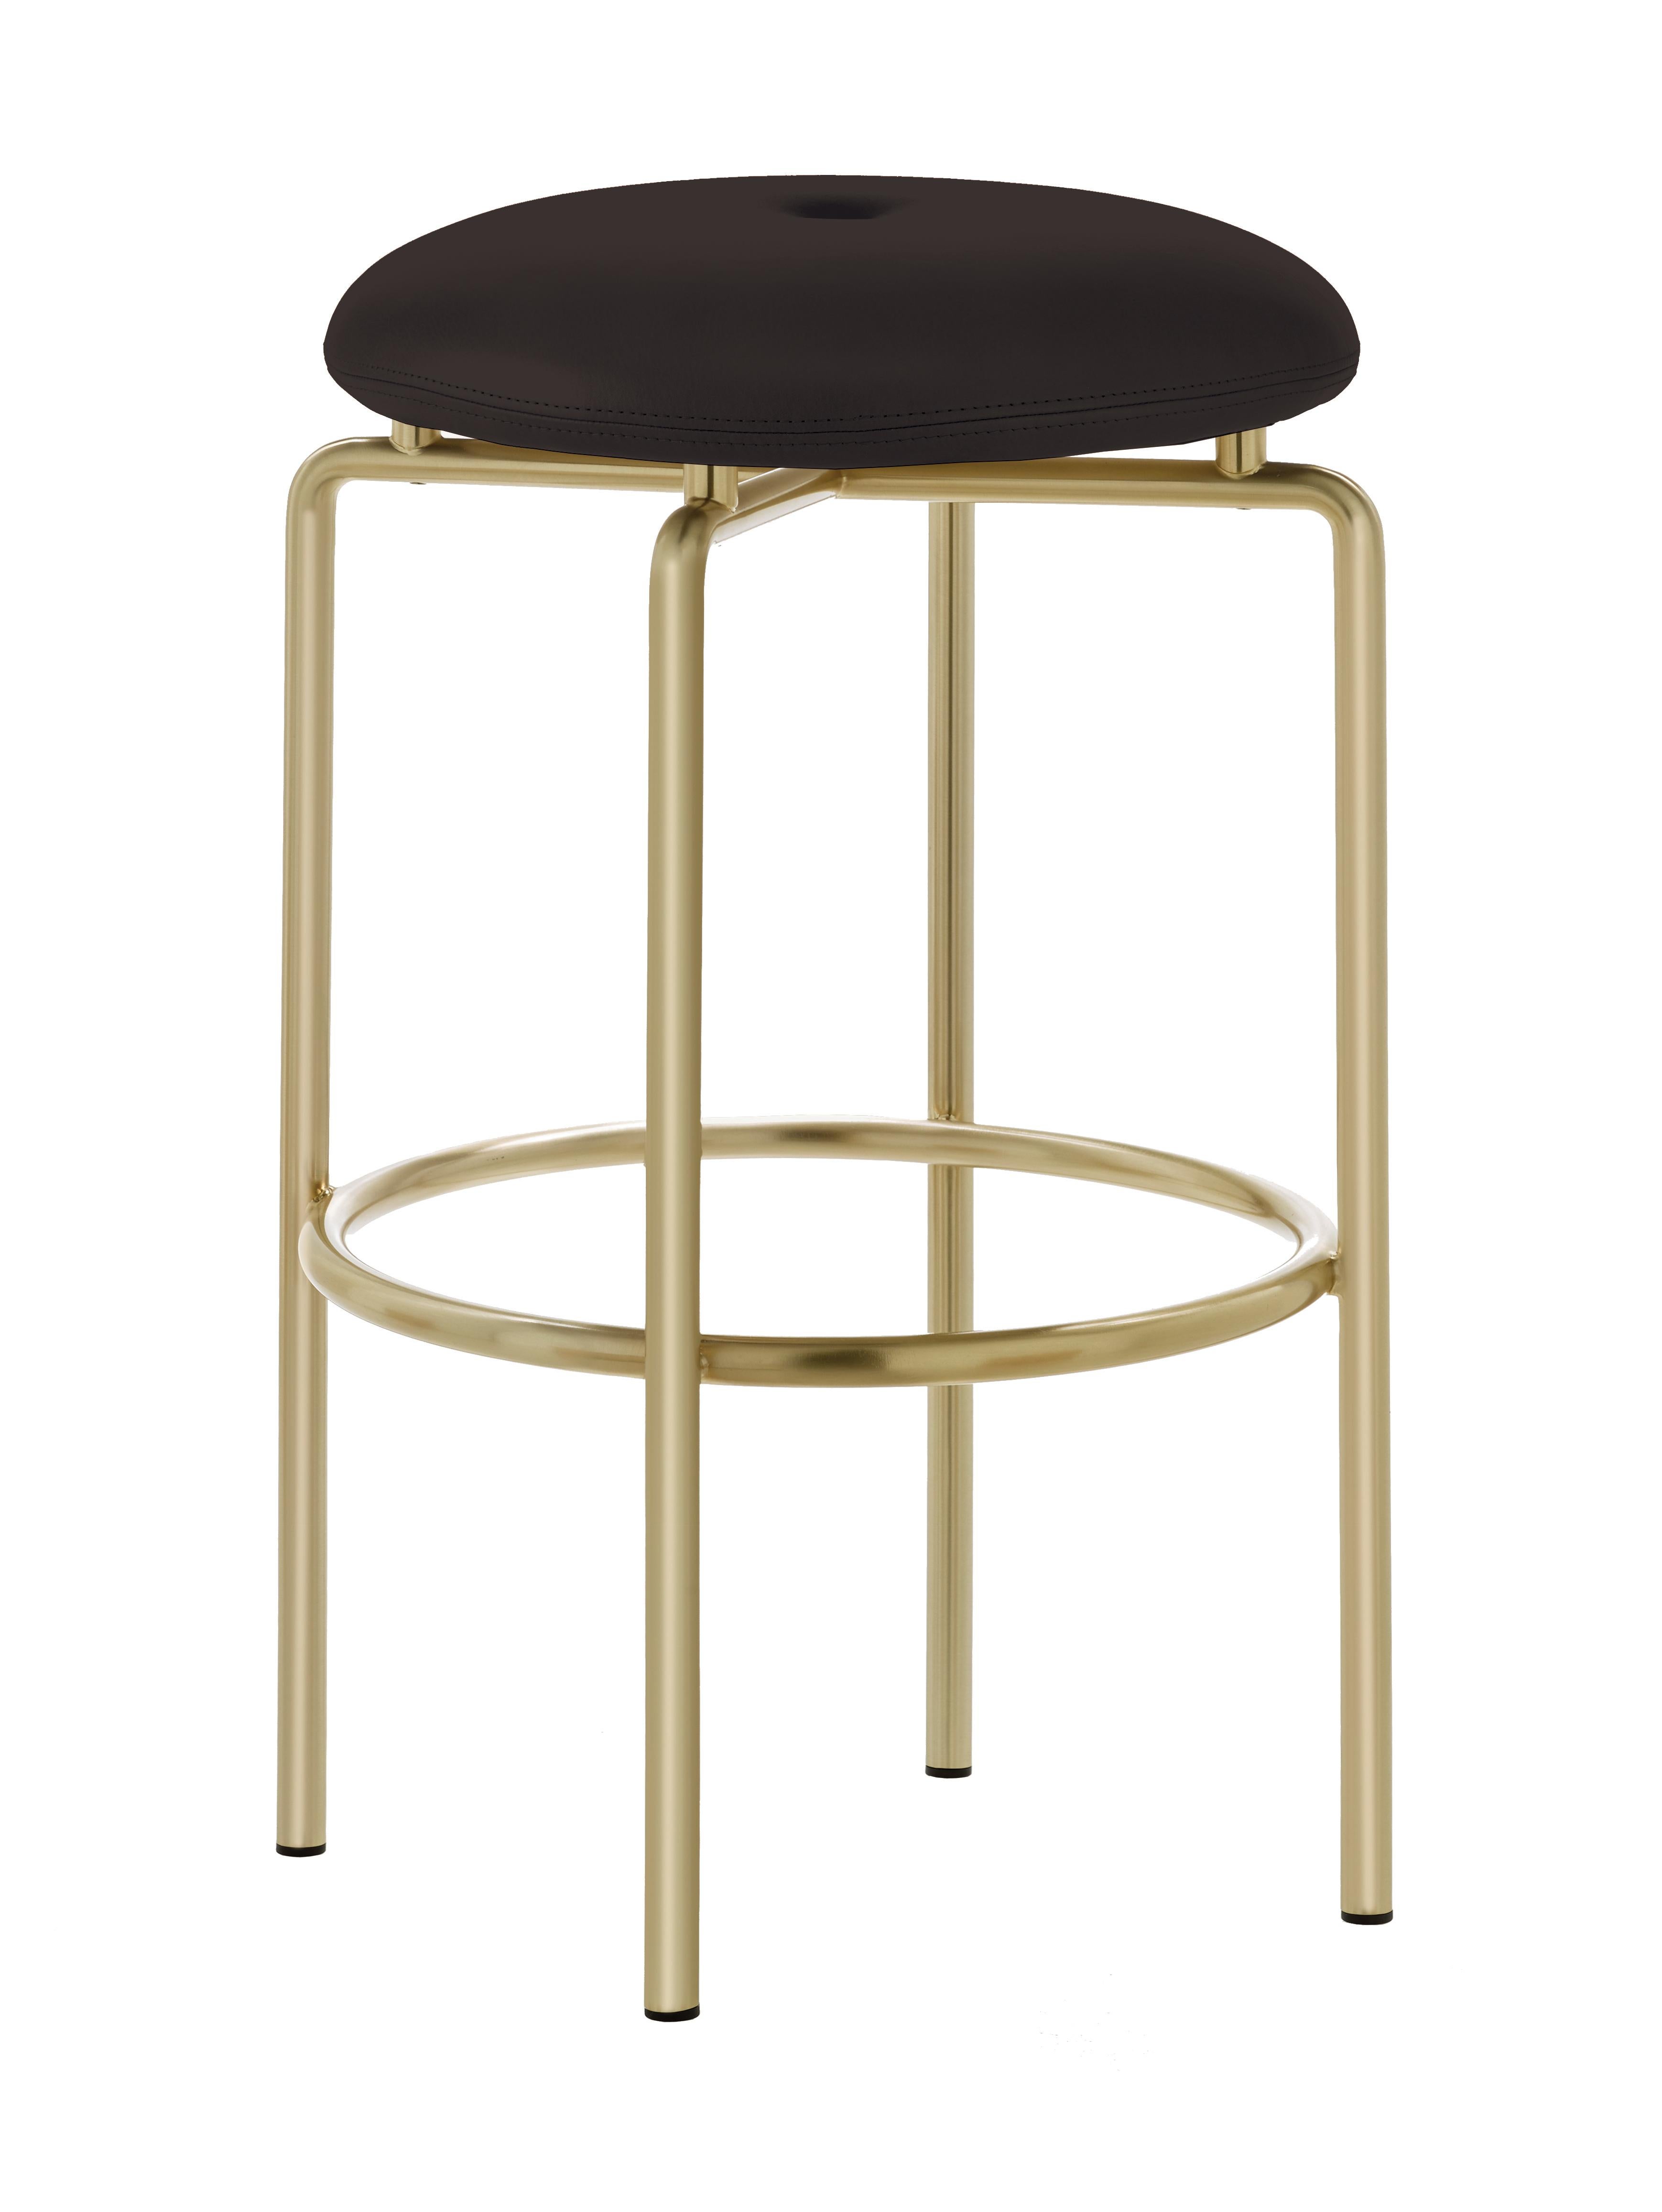 For Sale: Black (Elegant 99001 Black) Circular Counter Stool in Satin Brass and Leather Designed by Craig Bassam